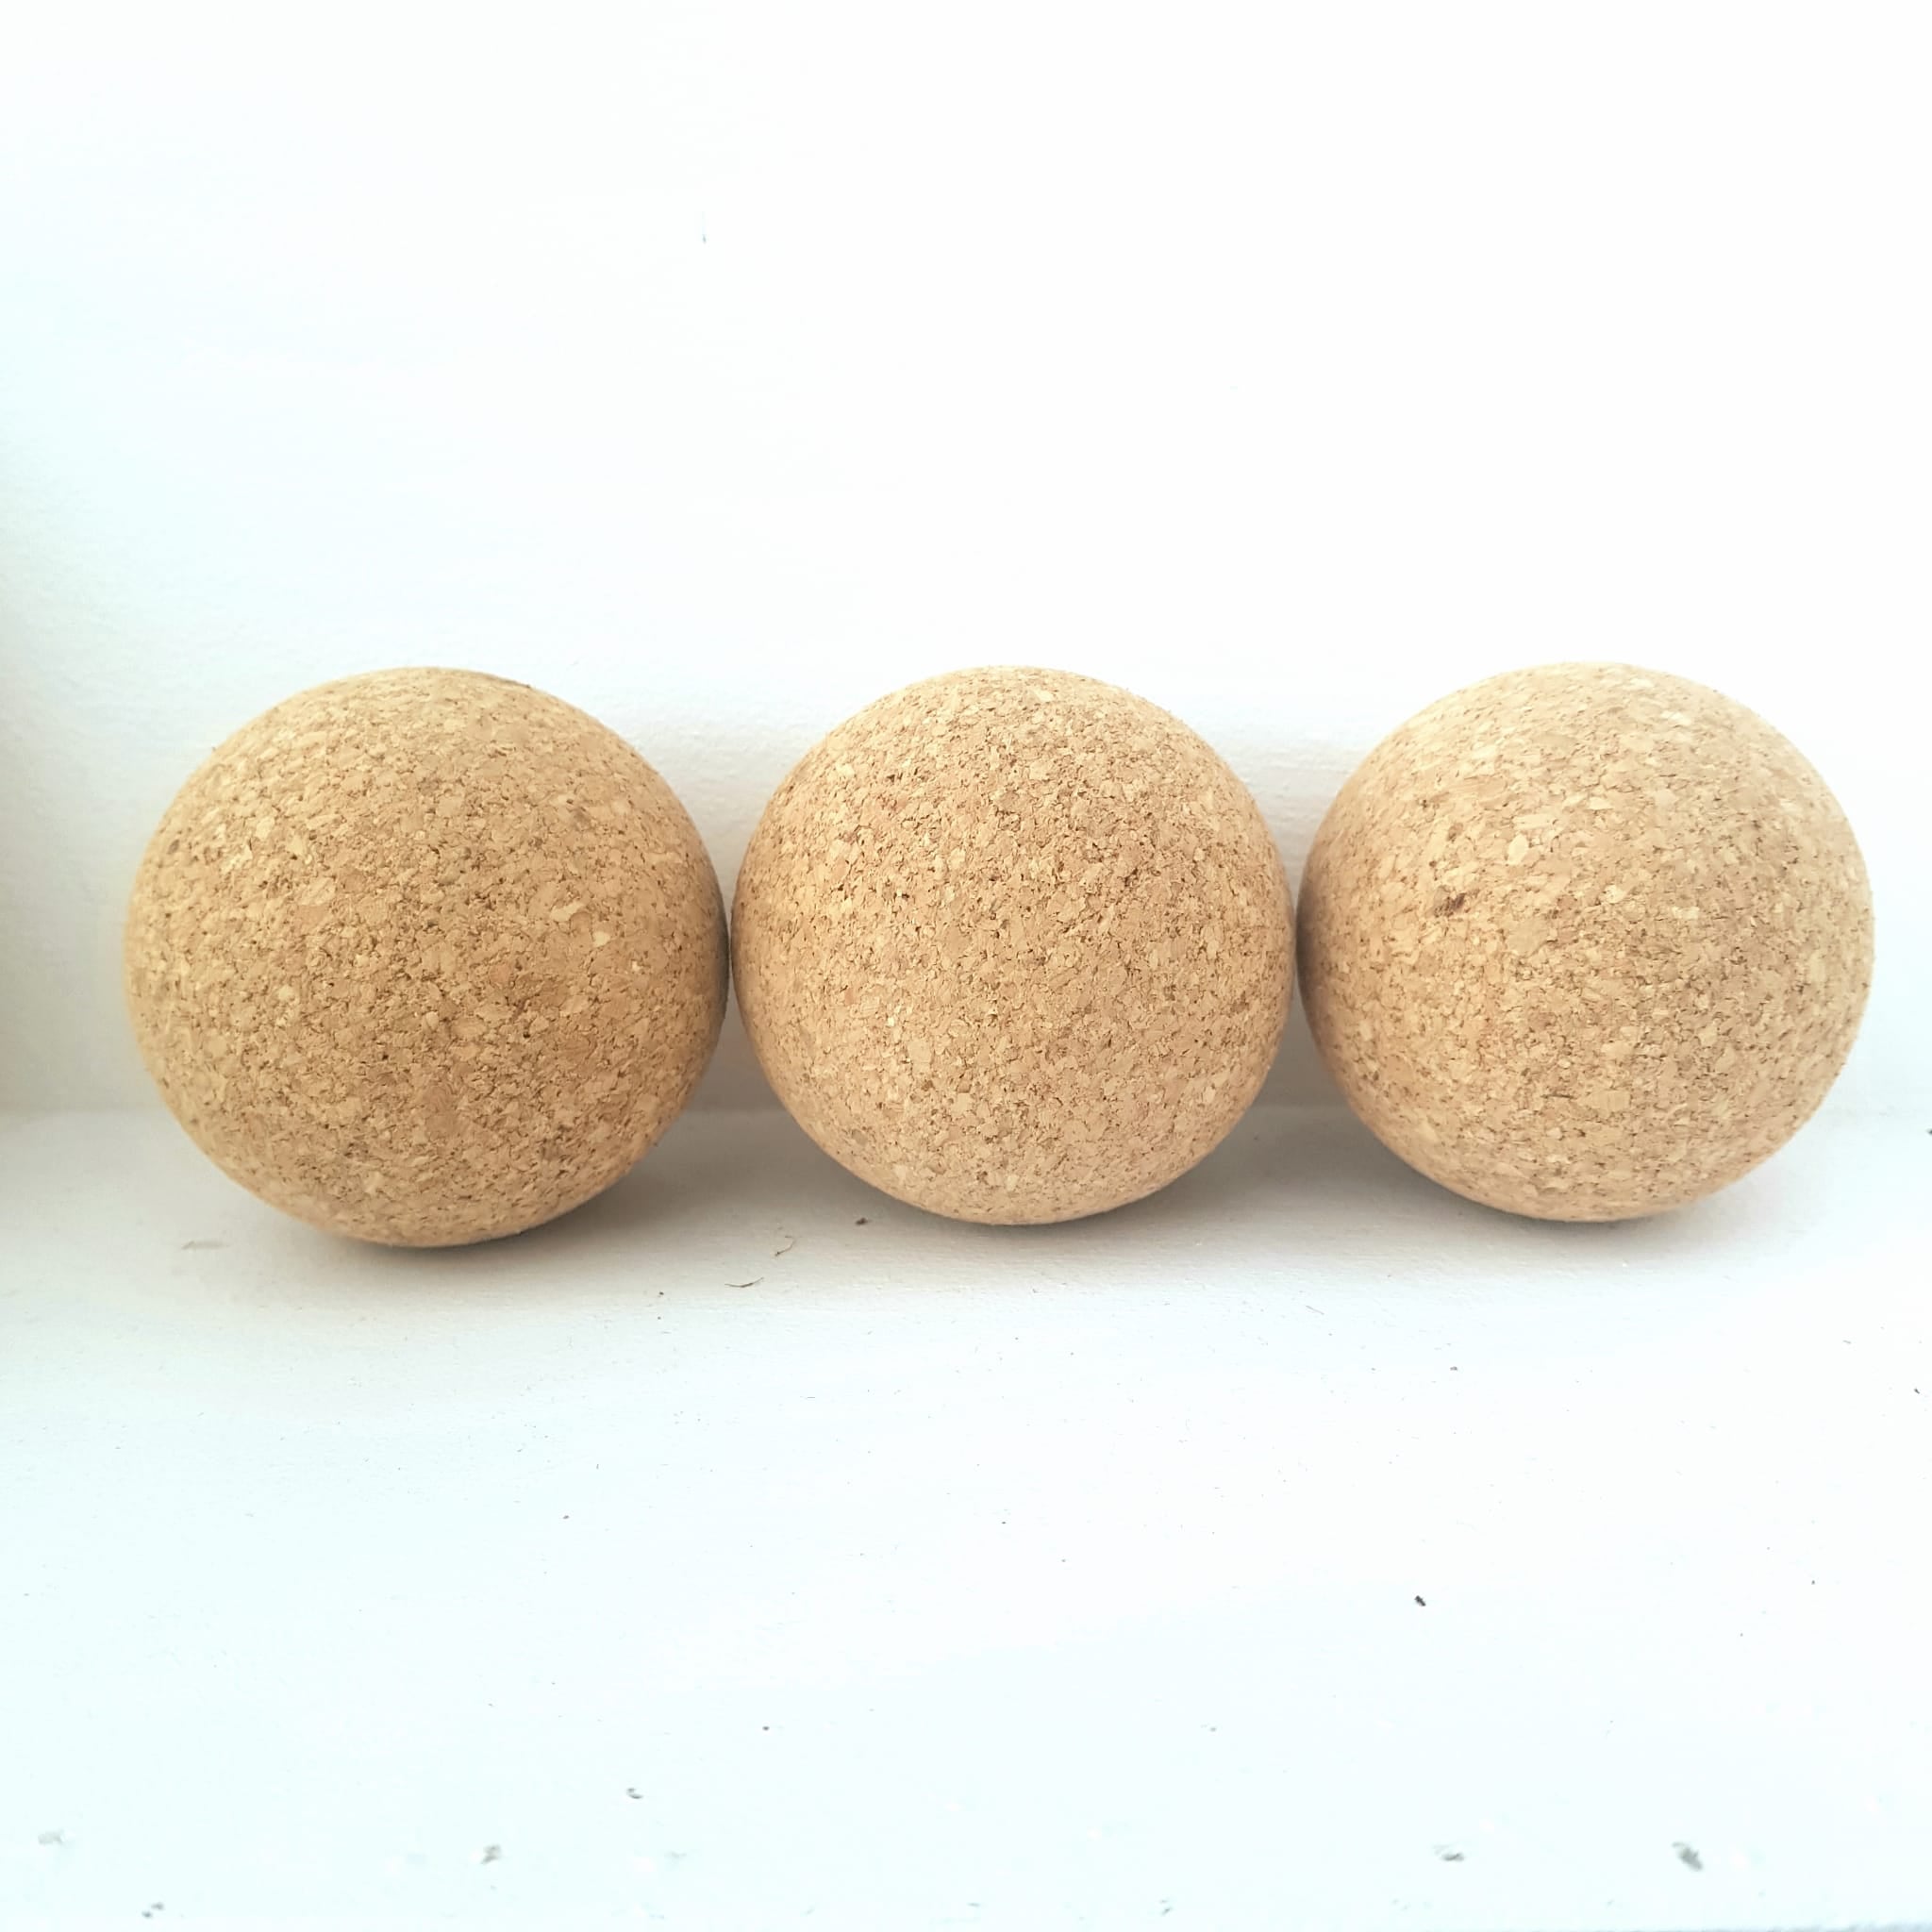 Yoga Massage ball, Cork Ball, Relaxing Ball, Yoga Products, Made in Portugal